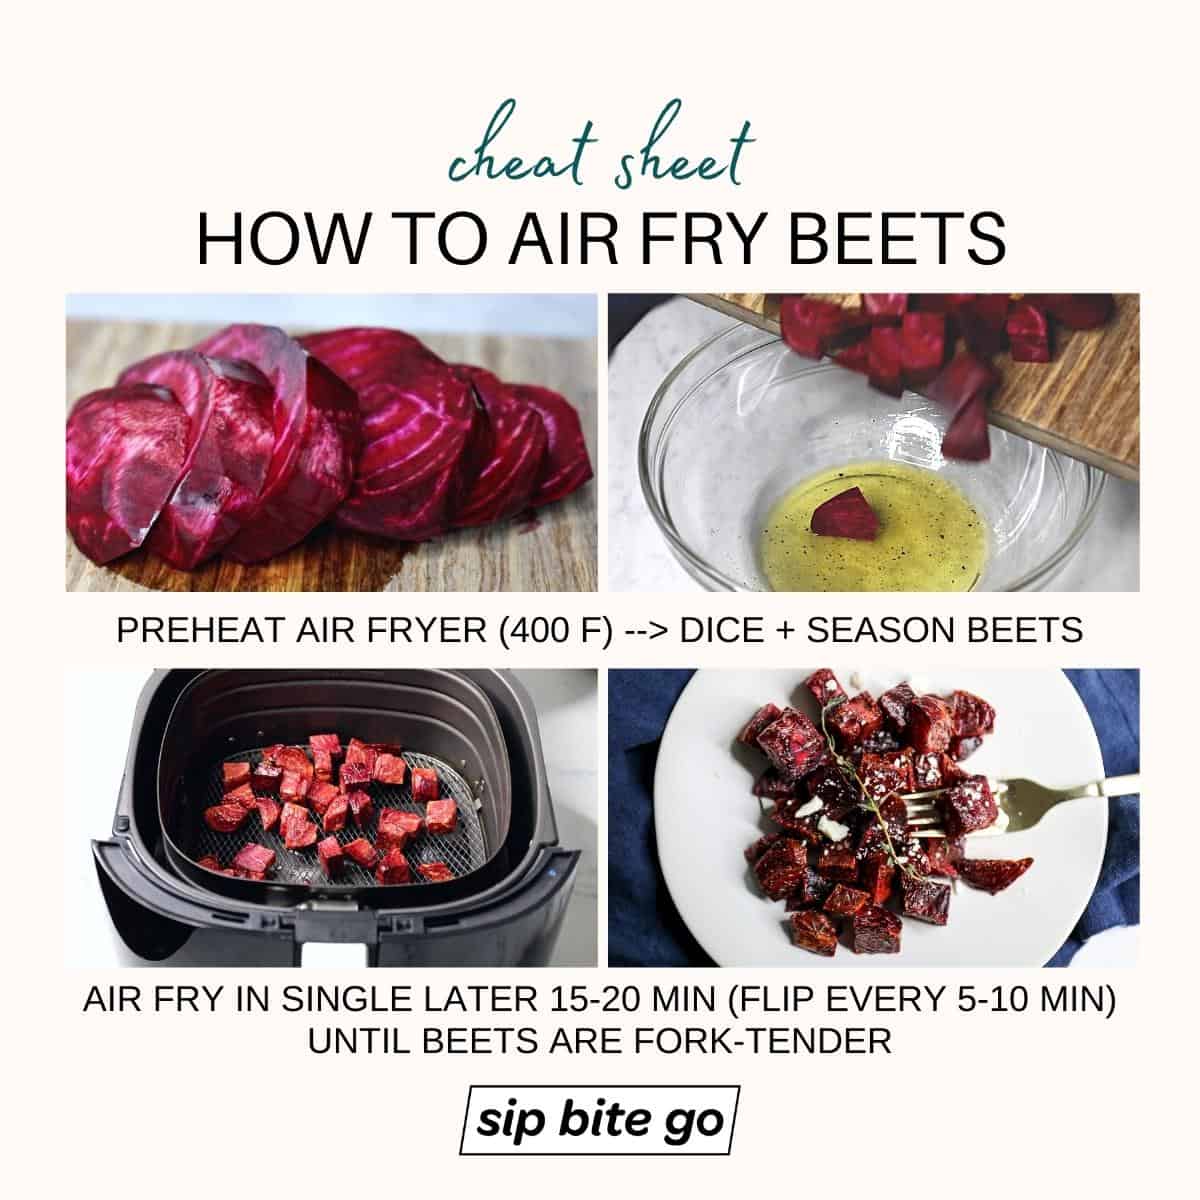 infographic demonstrating how to air fry beets